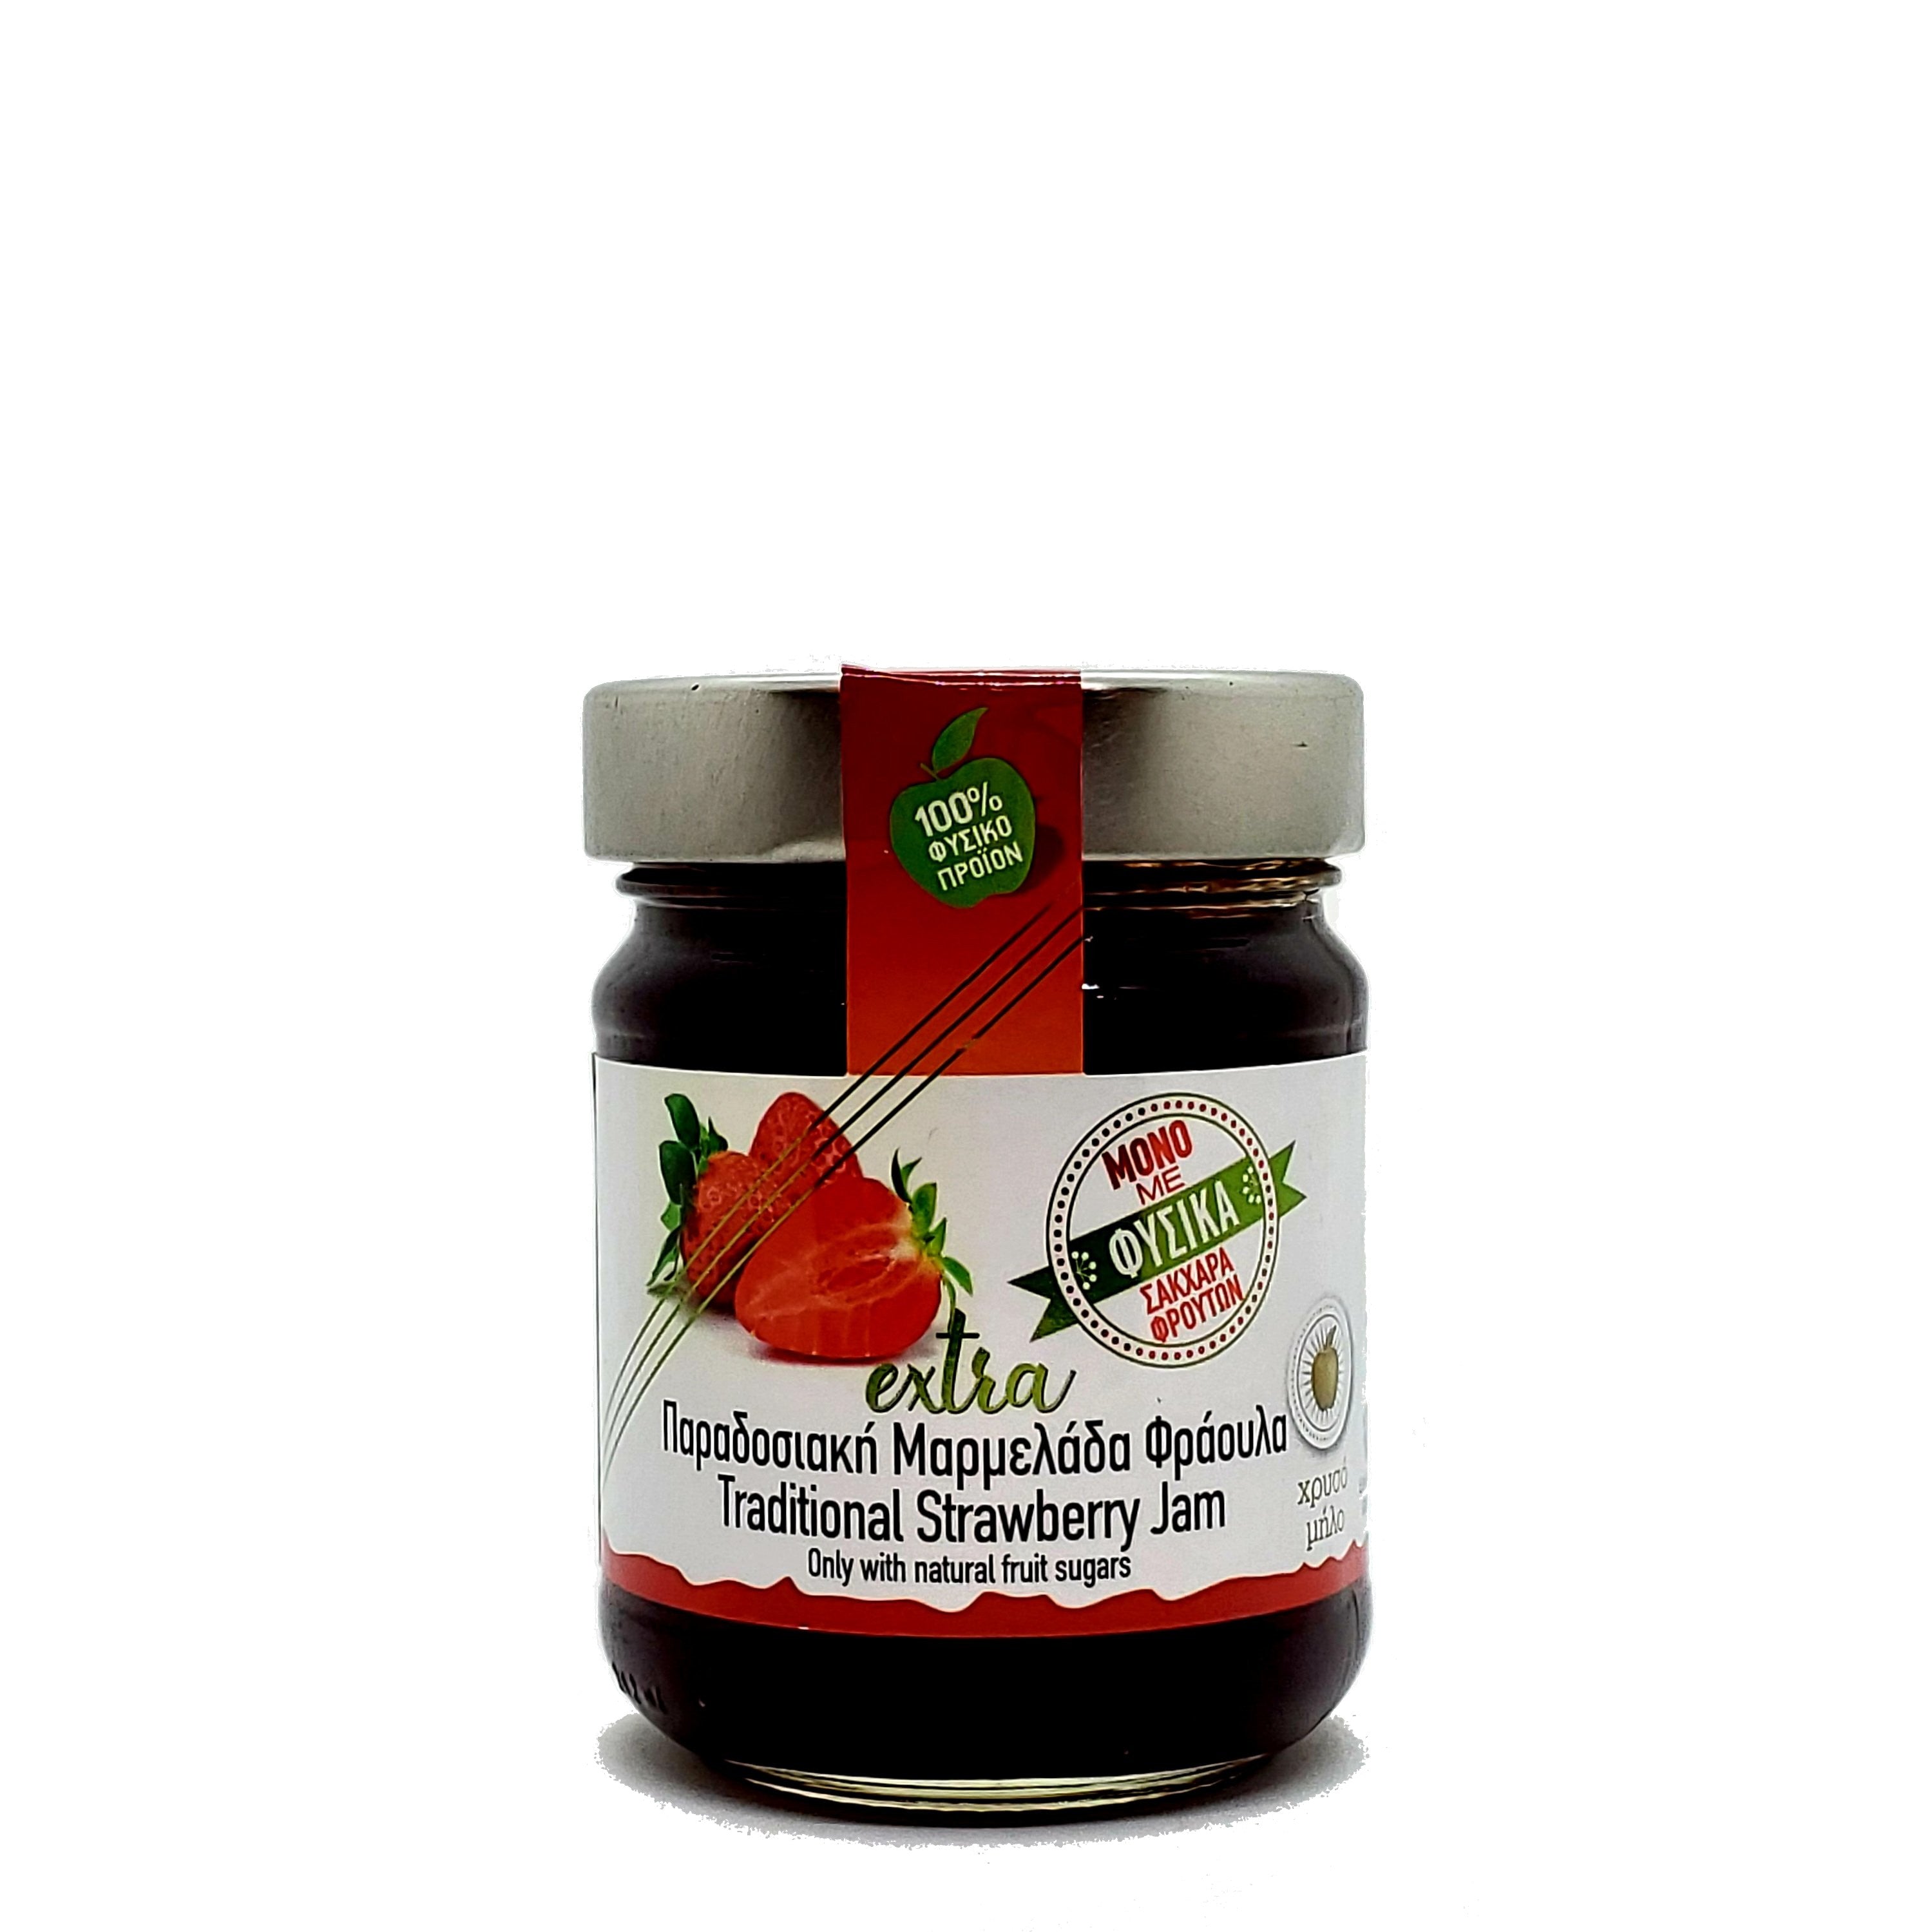 Traditional Strawberry Jam from Pelion - No Added Sugar